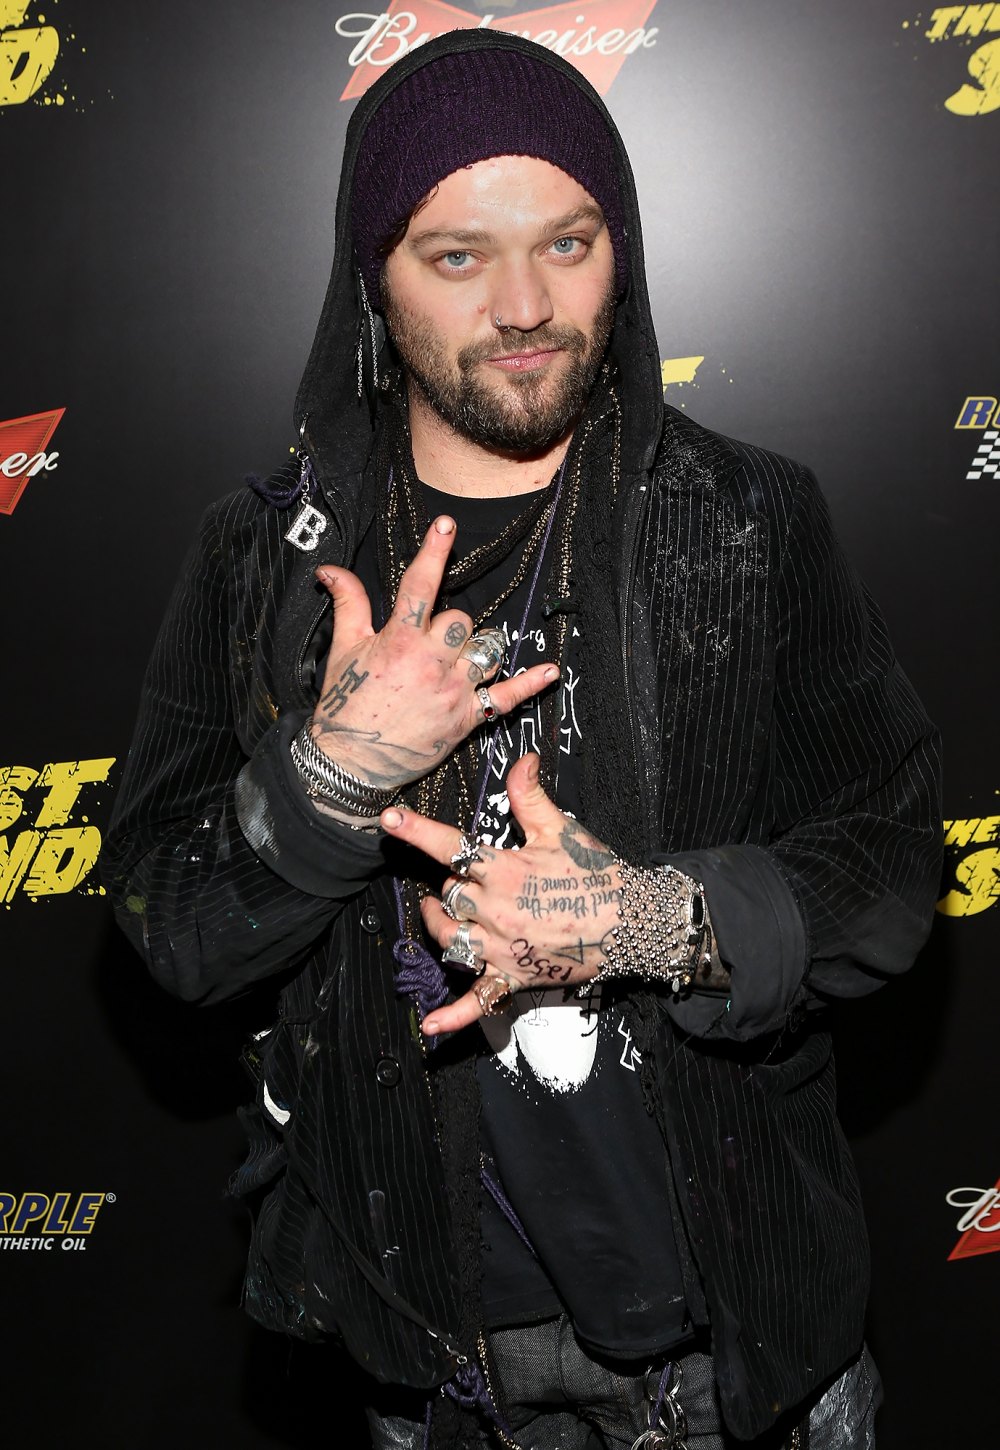 Bam Margera ‘Didn’t Want to Wake Up’ Amid Personal Struggles, Prayed The Day Before He Met Fiancee